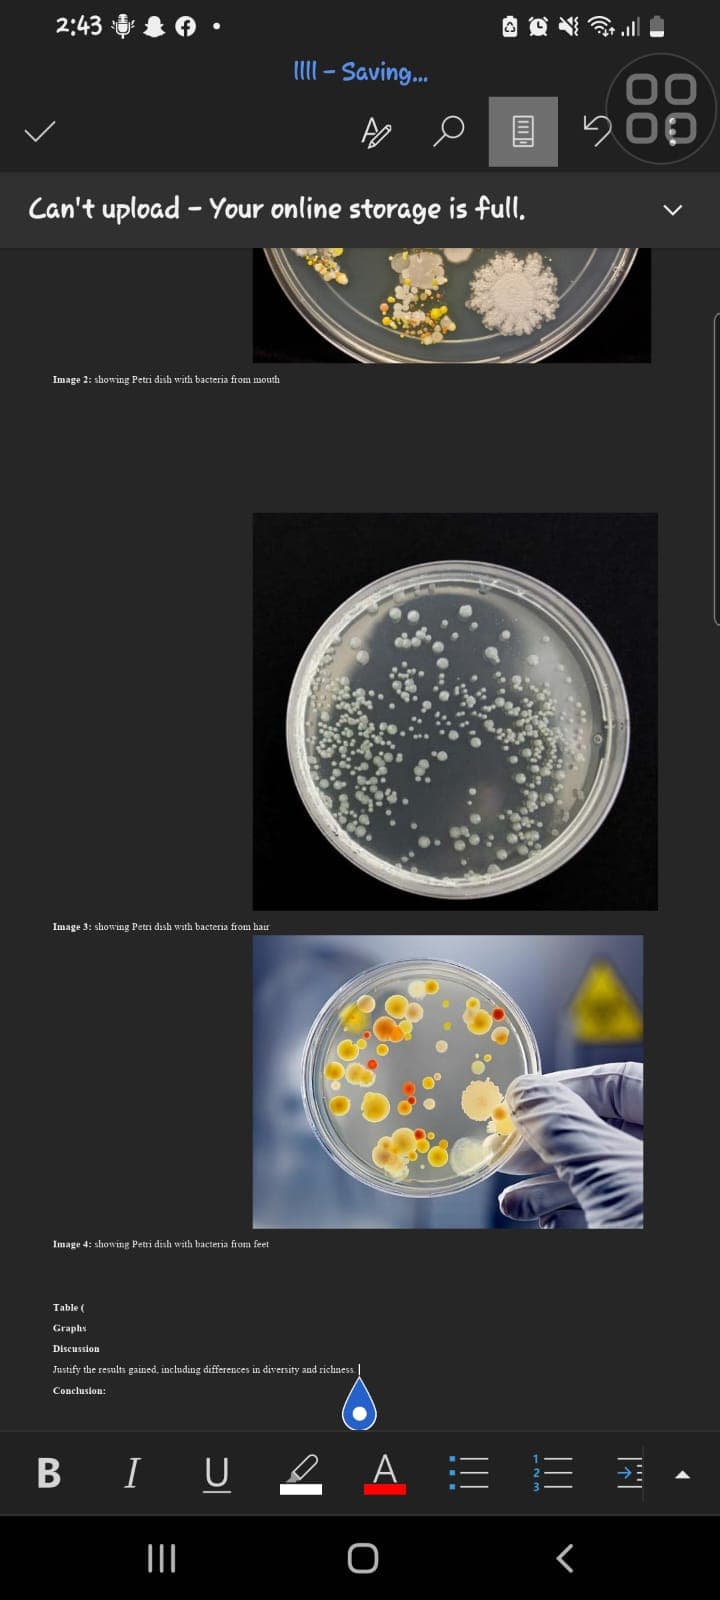 2:43
Can't upload - Your online storage is full.
Image 2: showing Petri dish with bacteria from mouth
Image 3: showing Petri dish with bacteria from hair
Image 4: showing Petri dish with bacteria from feet
Table (
Graphs
Discussion
Justify the results gained, including differences in diversity and richness
Conclusion:
IIII - Saving...
BIU
|||
A E
O
00
500
r
TAT